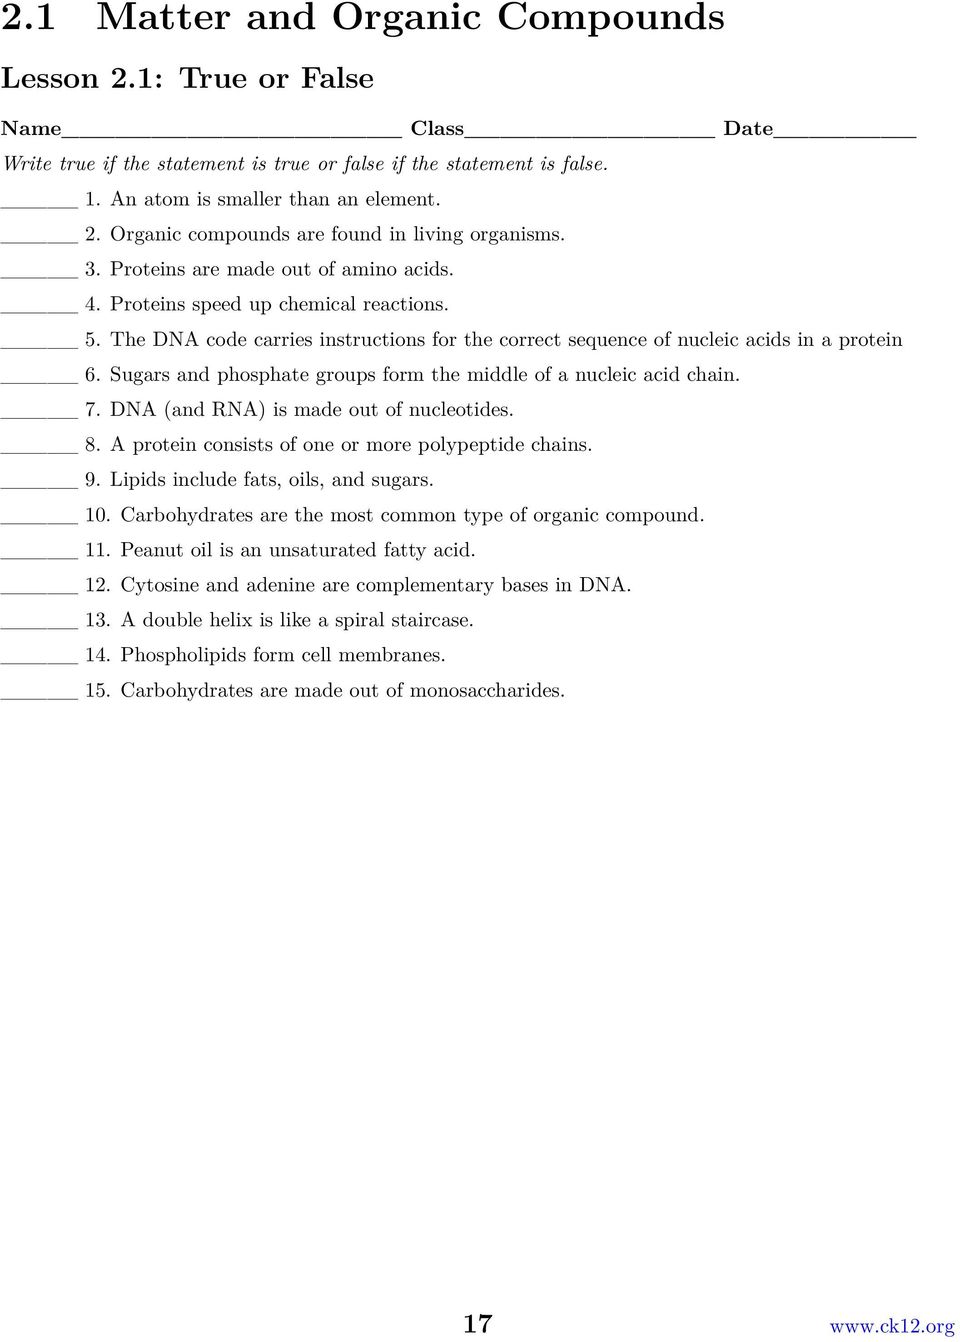 Chapter 23. The Chemistry of Life Worksheets - PDF Free Download Throughout The Chemistry Of Life Worksheet